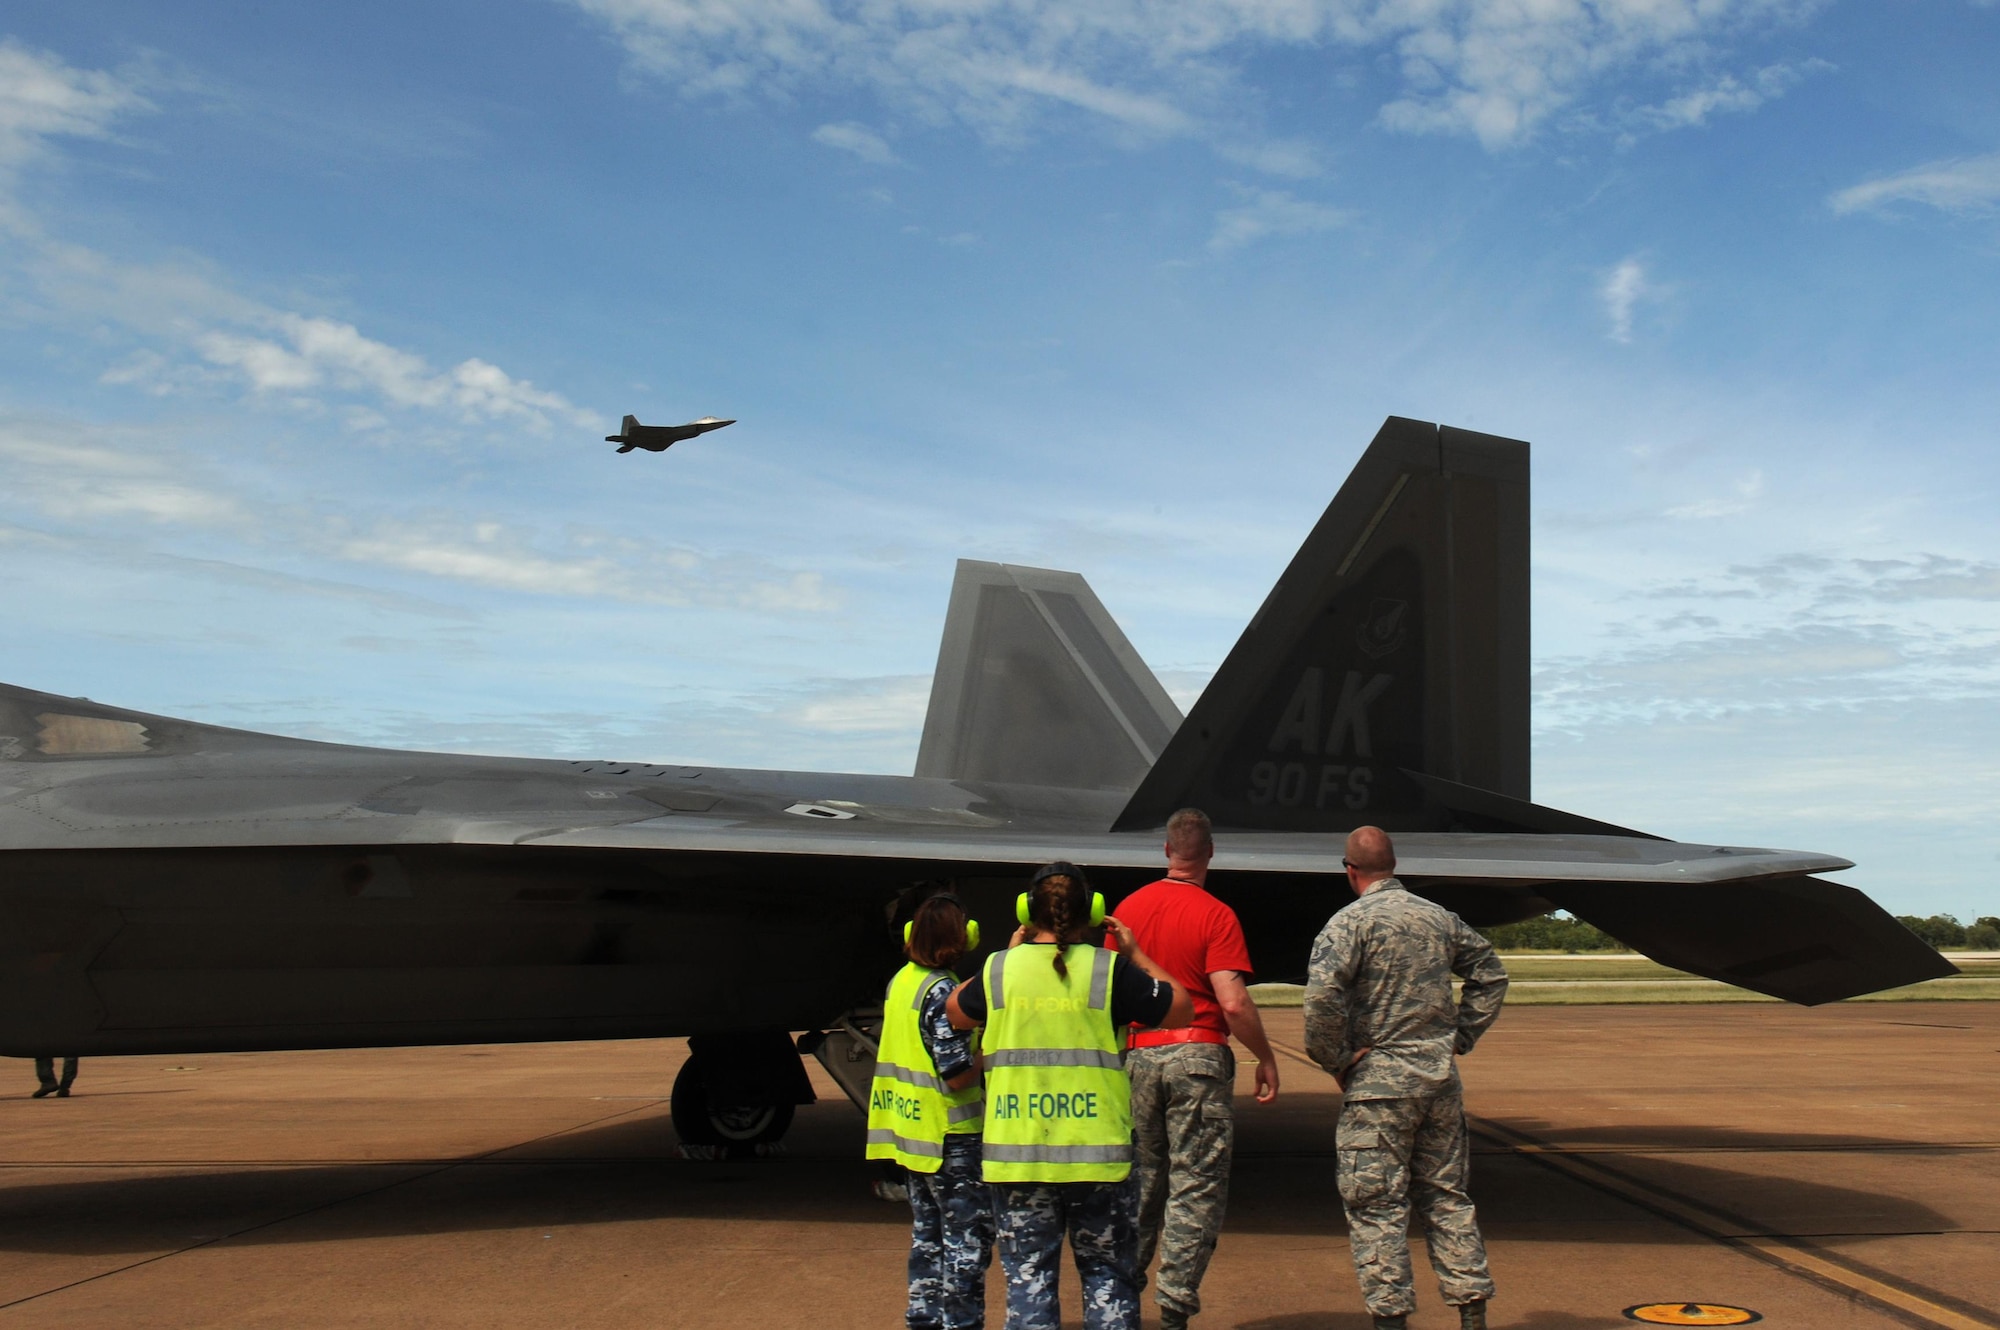 U.S. and Royal Australian Air Force maintenance airmen watch as an F-22 Raptor takes off at RAAF Base Tindal, Australia, Feb. 24, 2017. Twelve F-22 Raptors and approximately 200 U.S. Air Force Airmen are in Australia as part of the Enhanced Air Cooperation, an initiative under the Force Posture Agreement between the U.S. and Australia. (U.S. Air Force photo by Staff Sgt. Alexander Martinez)